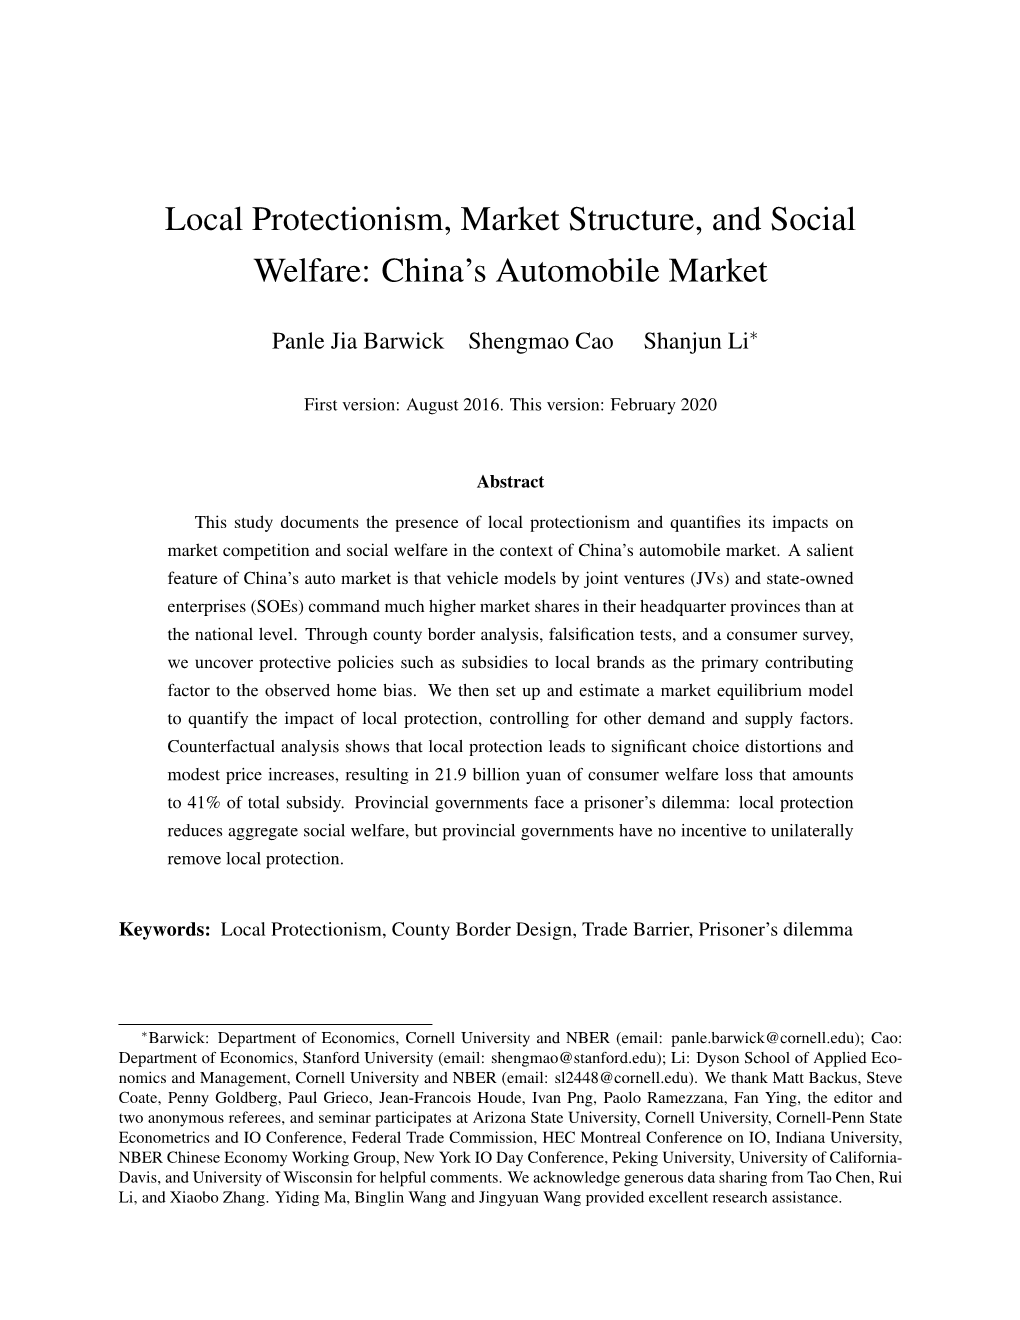 Local Protectionism, Market Structure, and Social Welfare: China's